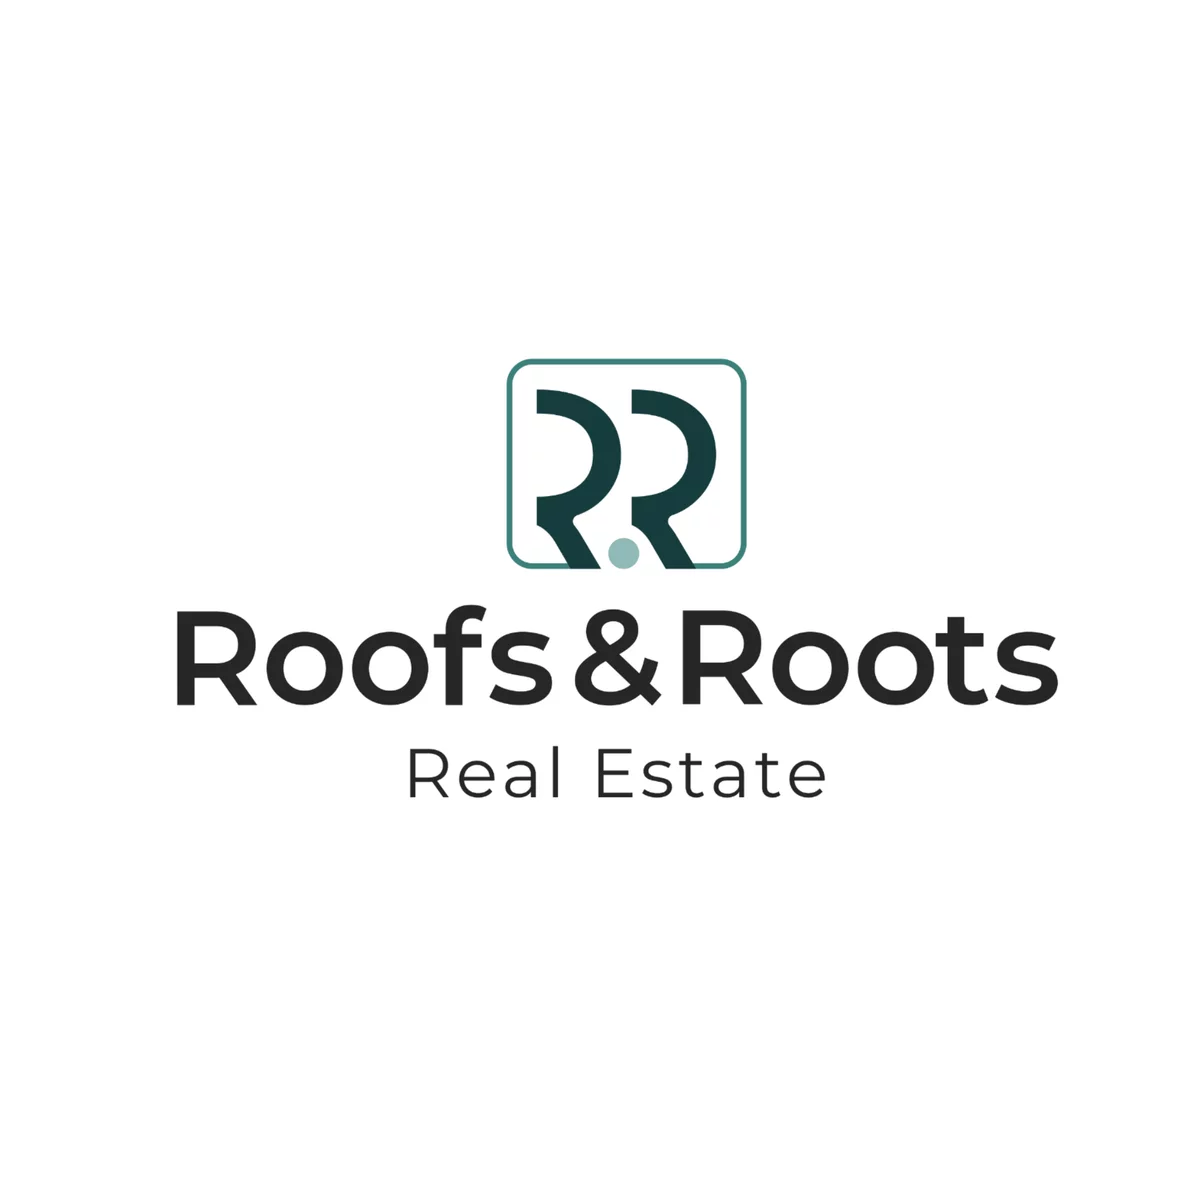 Roofs & Roots Real Estate